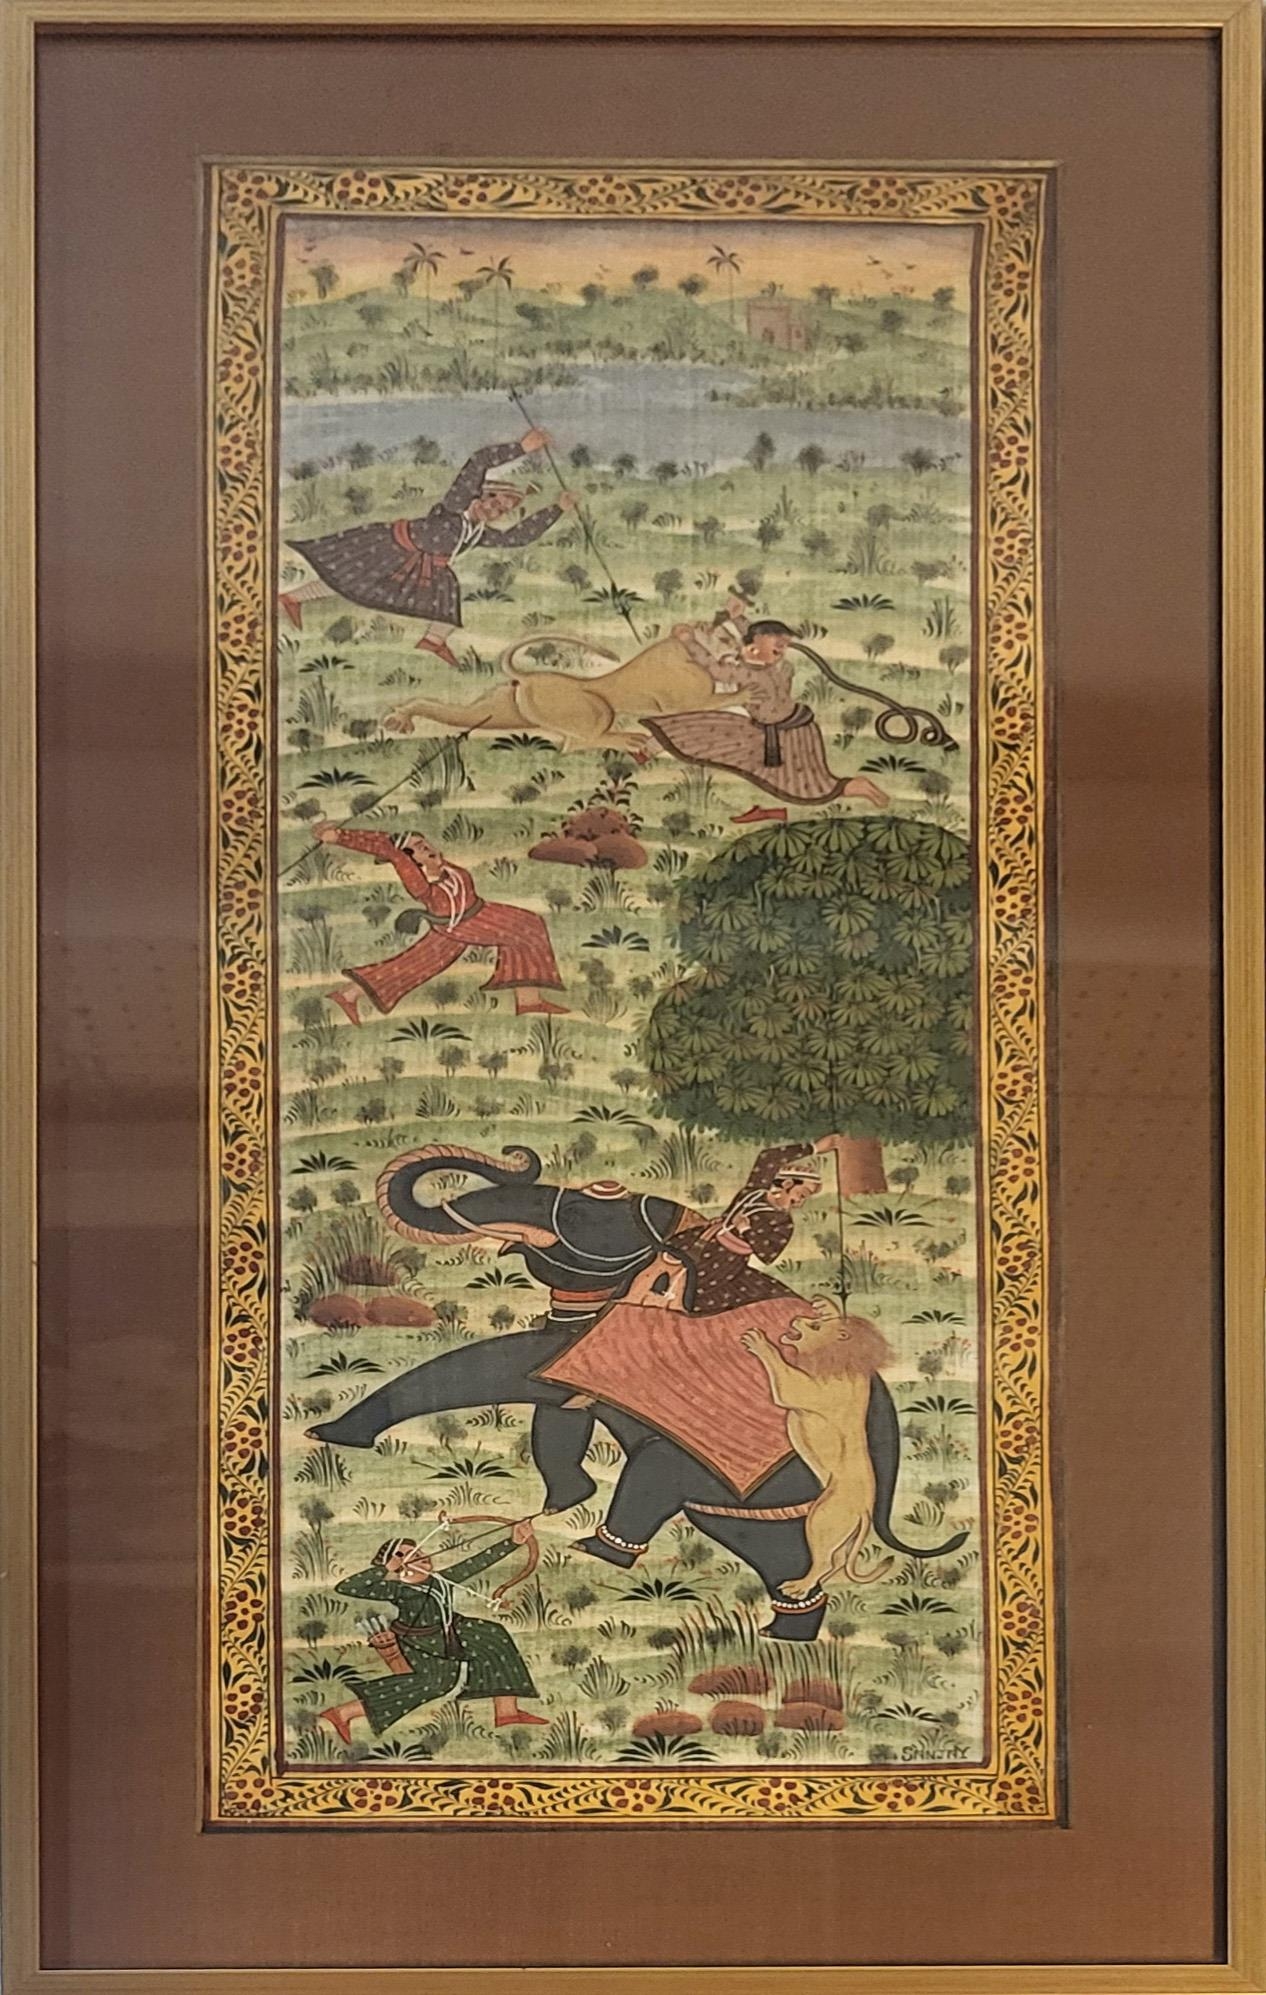 A 20TH CENTURY INDIAN SILK PAINTING, DEPICTING ORNATELY DRESSED NATIVES BATTLING A LION AND TIGER - Image 5 of 7